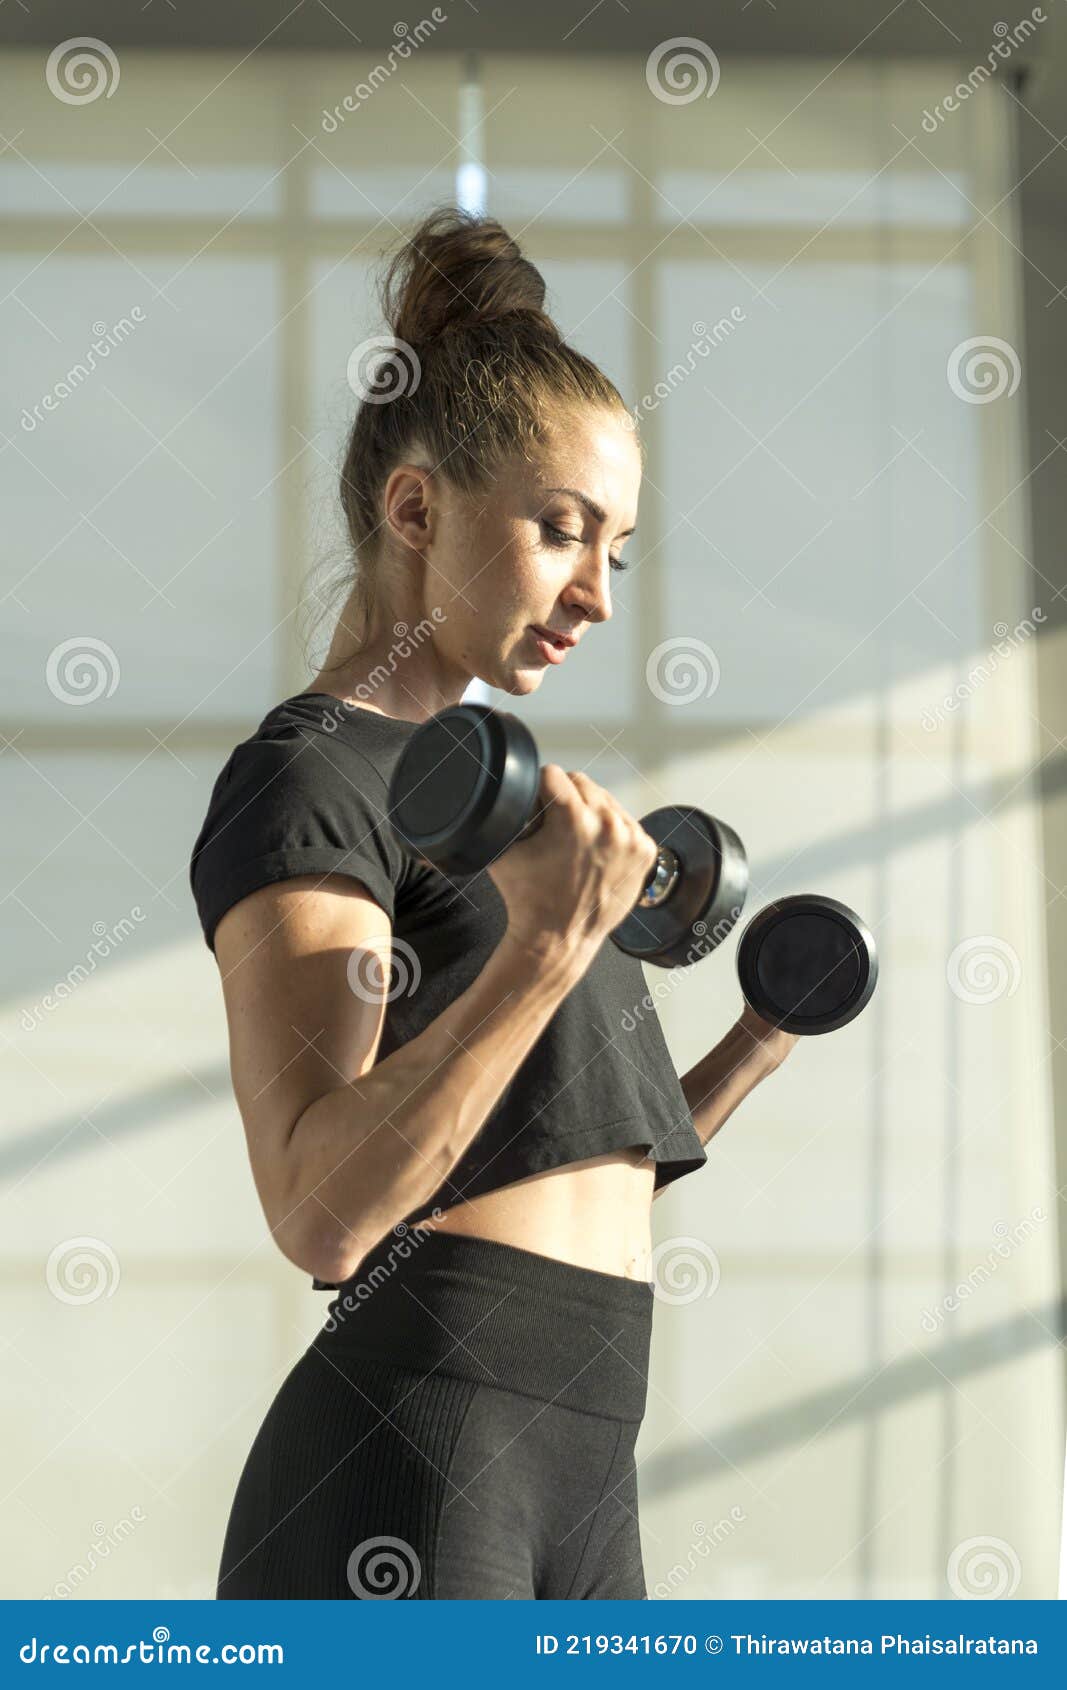 Concept Fitness Sport Training Lifestyle. Active Sport Athletic Woman with Dumbbells  Pumping Up Muscles Body Stock Photo - Image of dumbbell, body: 219341670